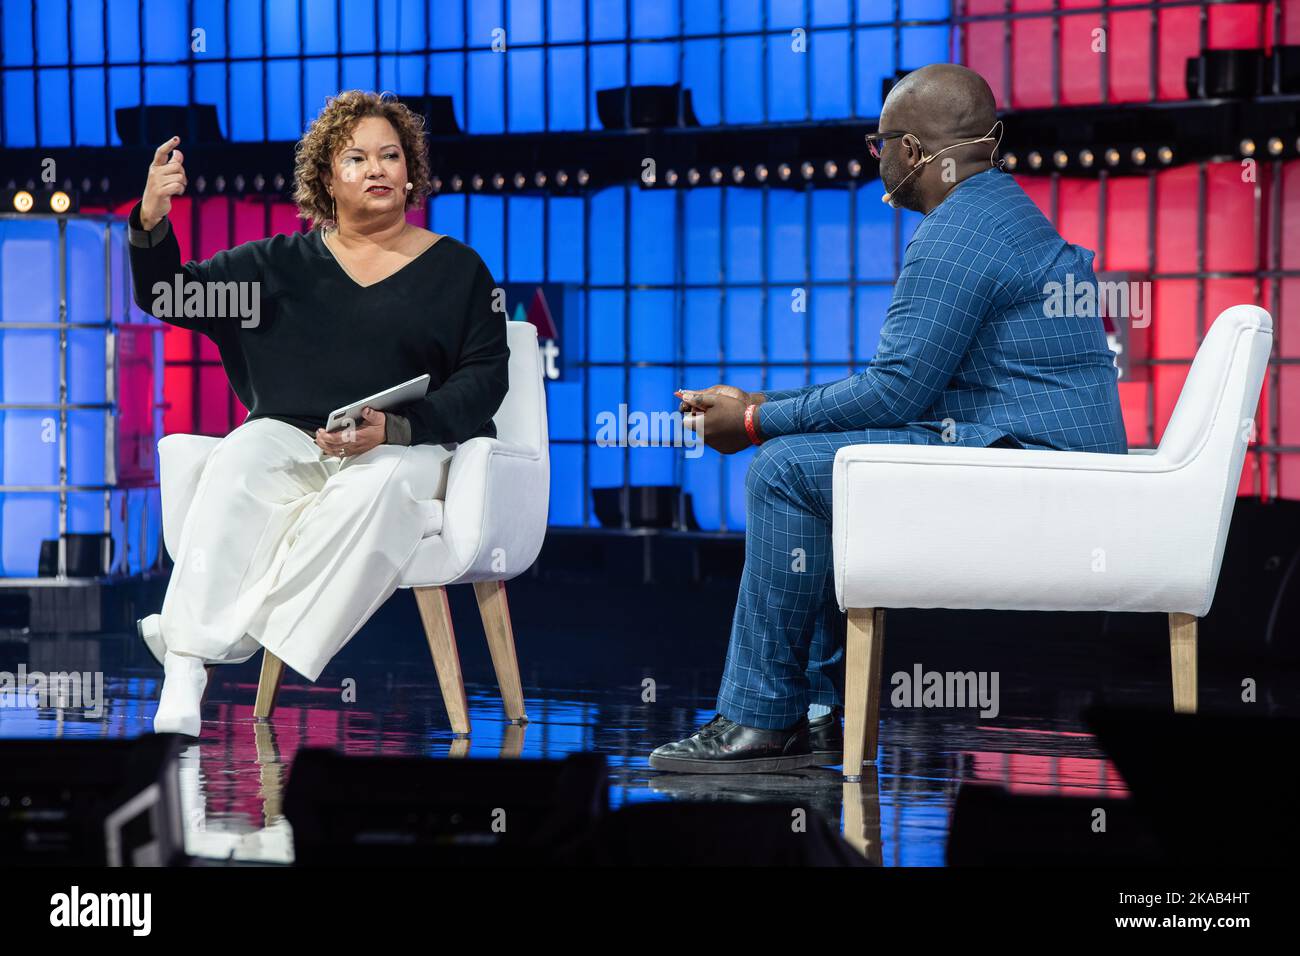 Lisbon, Portugal. 01st Nov, 2022. VP of Environmental Initiatives of Apple, Lisa Jackson (L), seen addressing the audience at Altice Arena Centre Stage during the opening night of the Web Summit 2022. The biggest technology conference in the world is back in Lisbon. For four days, new technological trends will be discussed and how they will influence our lives. 70,000 people are expected at the event. Credit: SOPA Images Limited/Alamy Live News Stock Photo